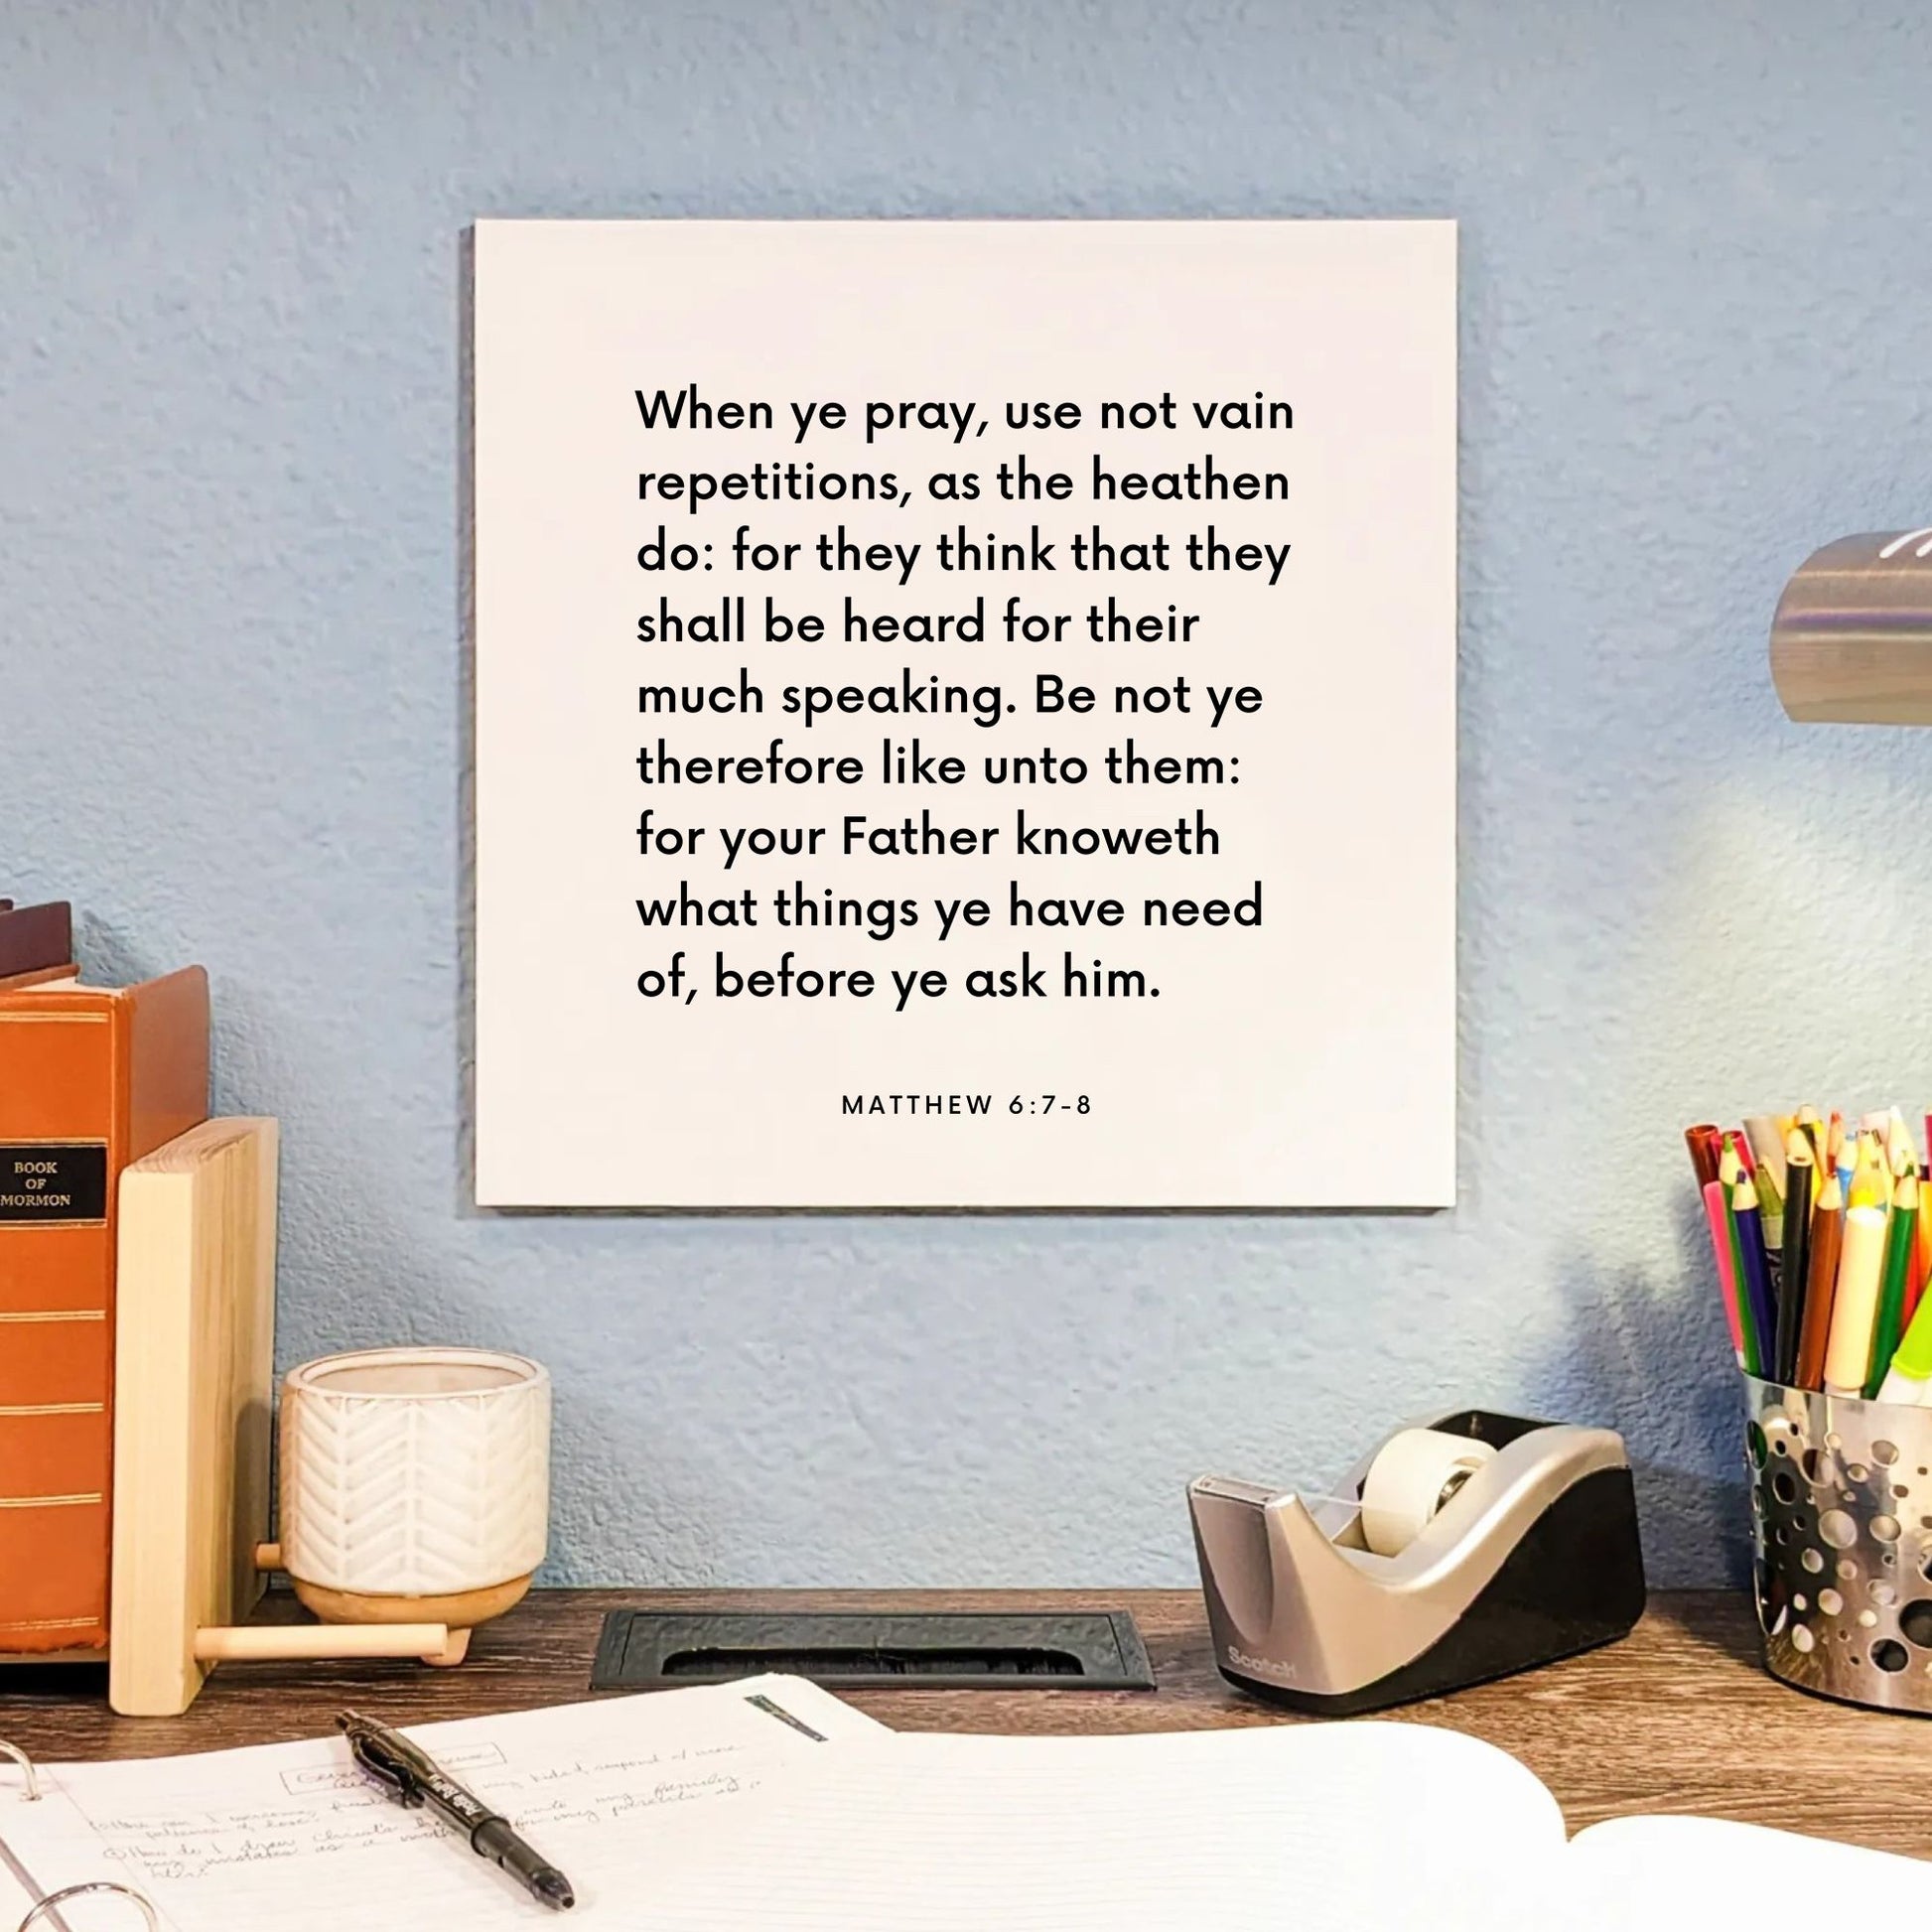 Desk mouting of the scripture tile for Matthew 6:7-8 - "Your Father knoweth what things ye have need of"